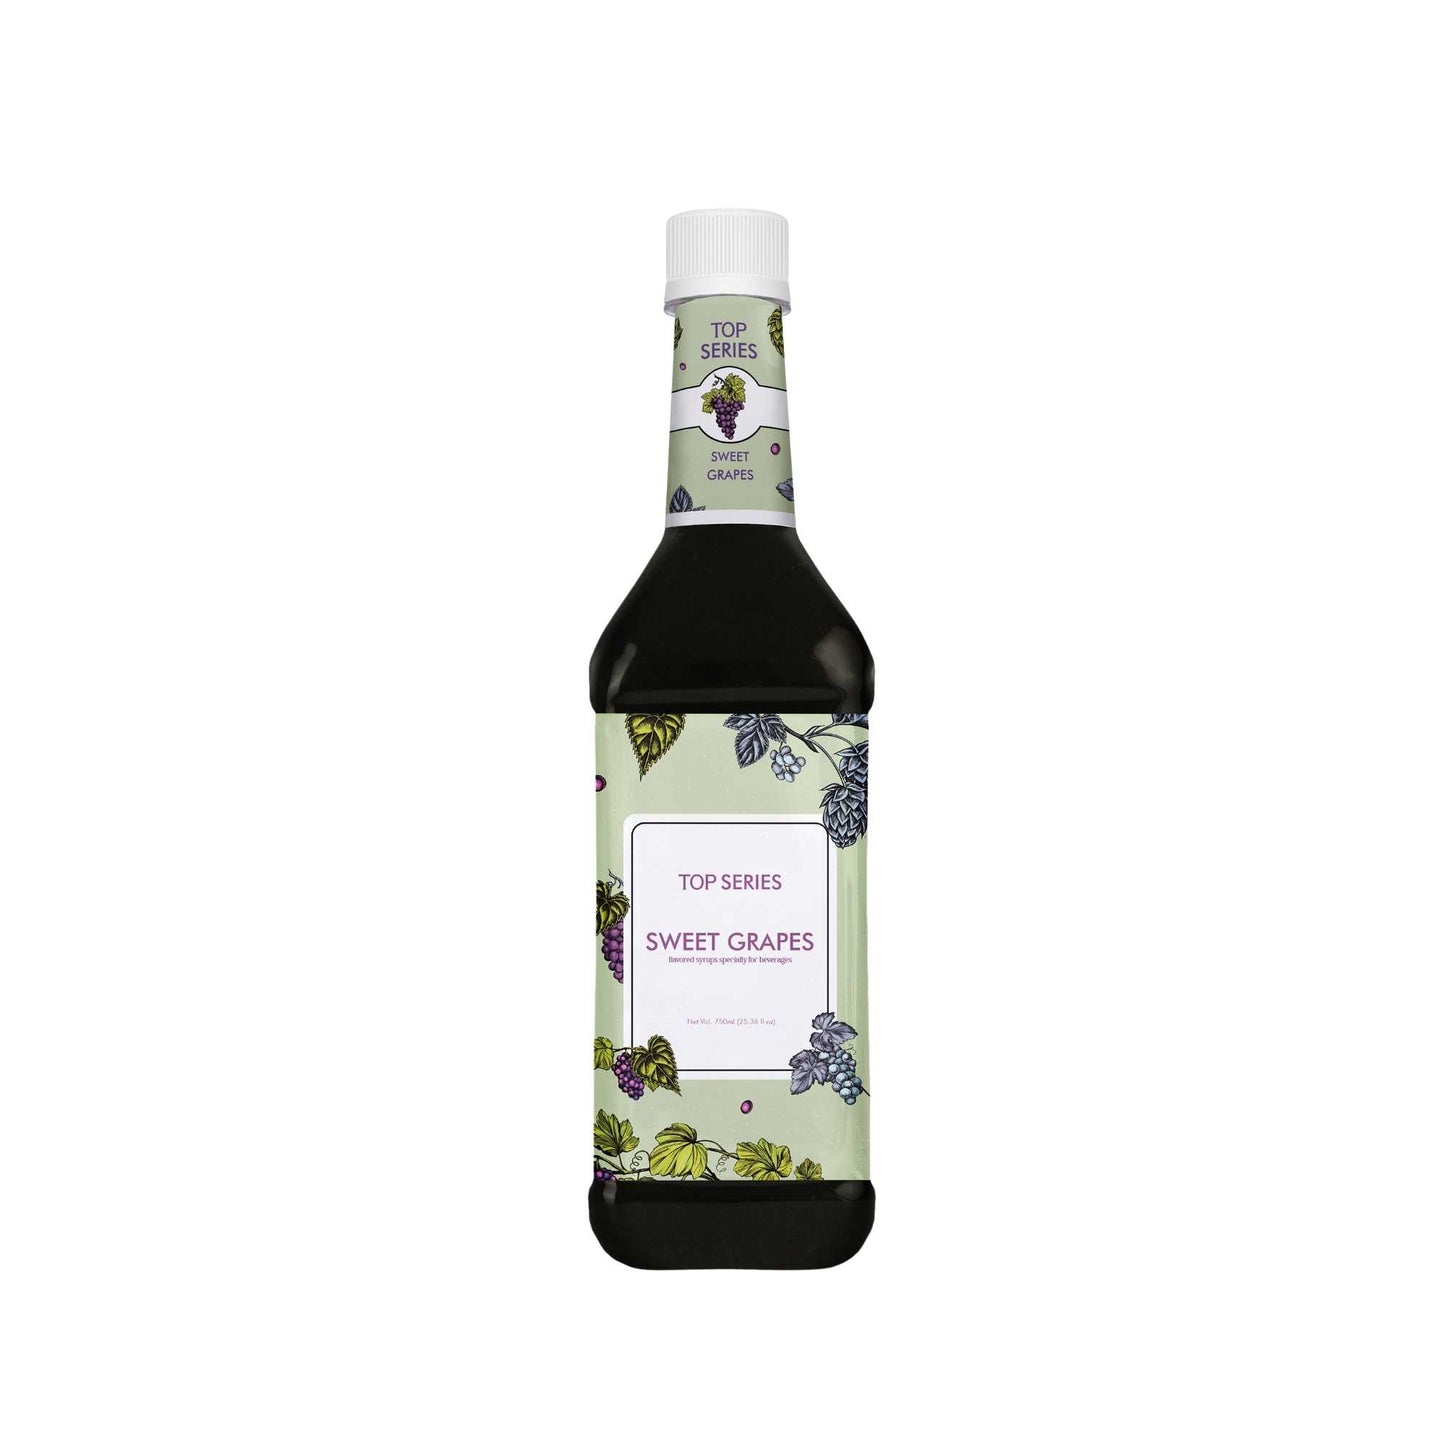 TOP Creamery Top Series Sweet Grapes Syrup 750ml